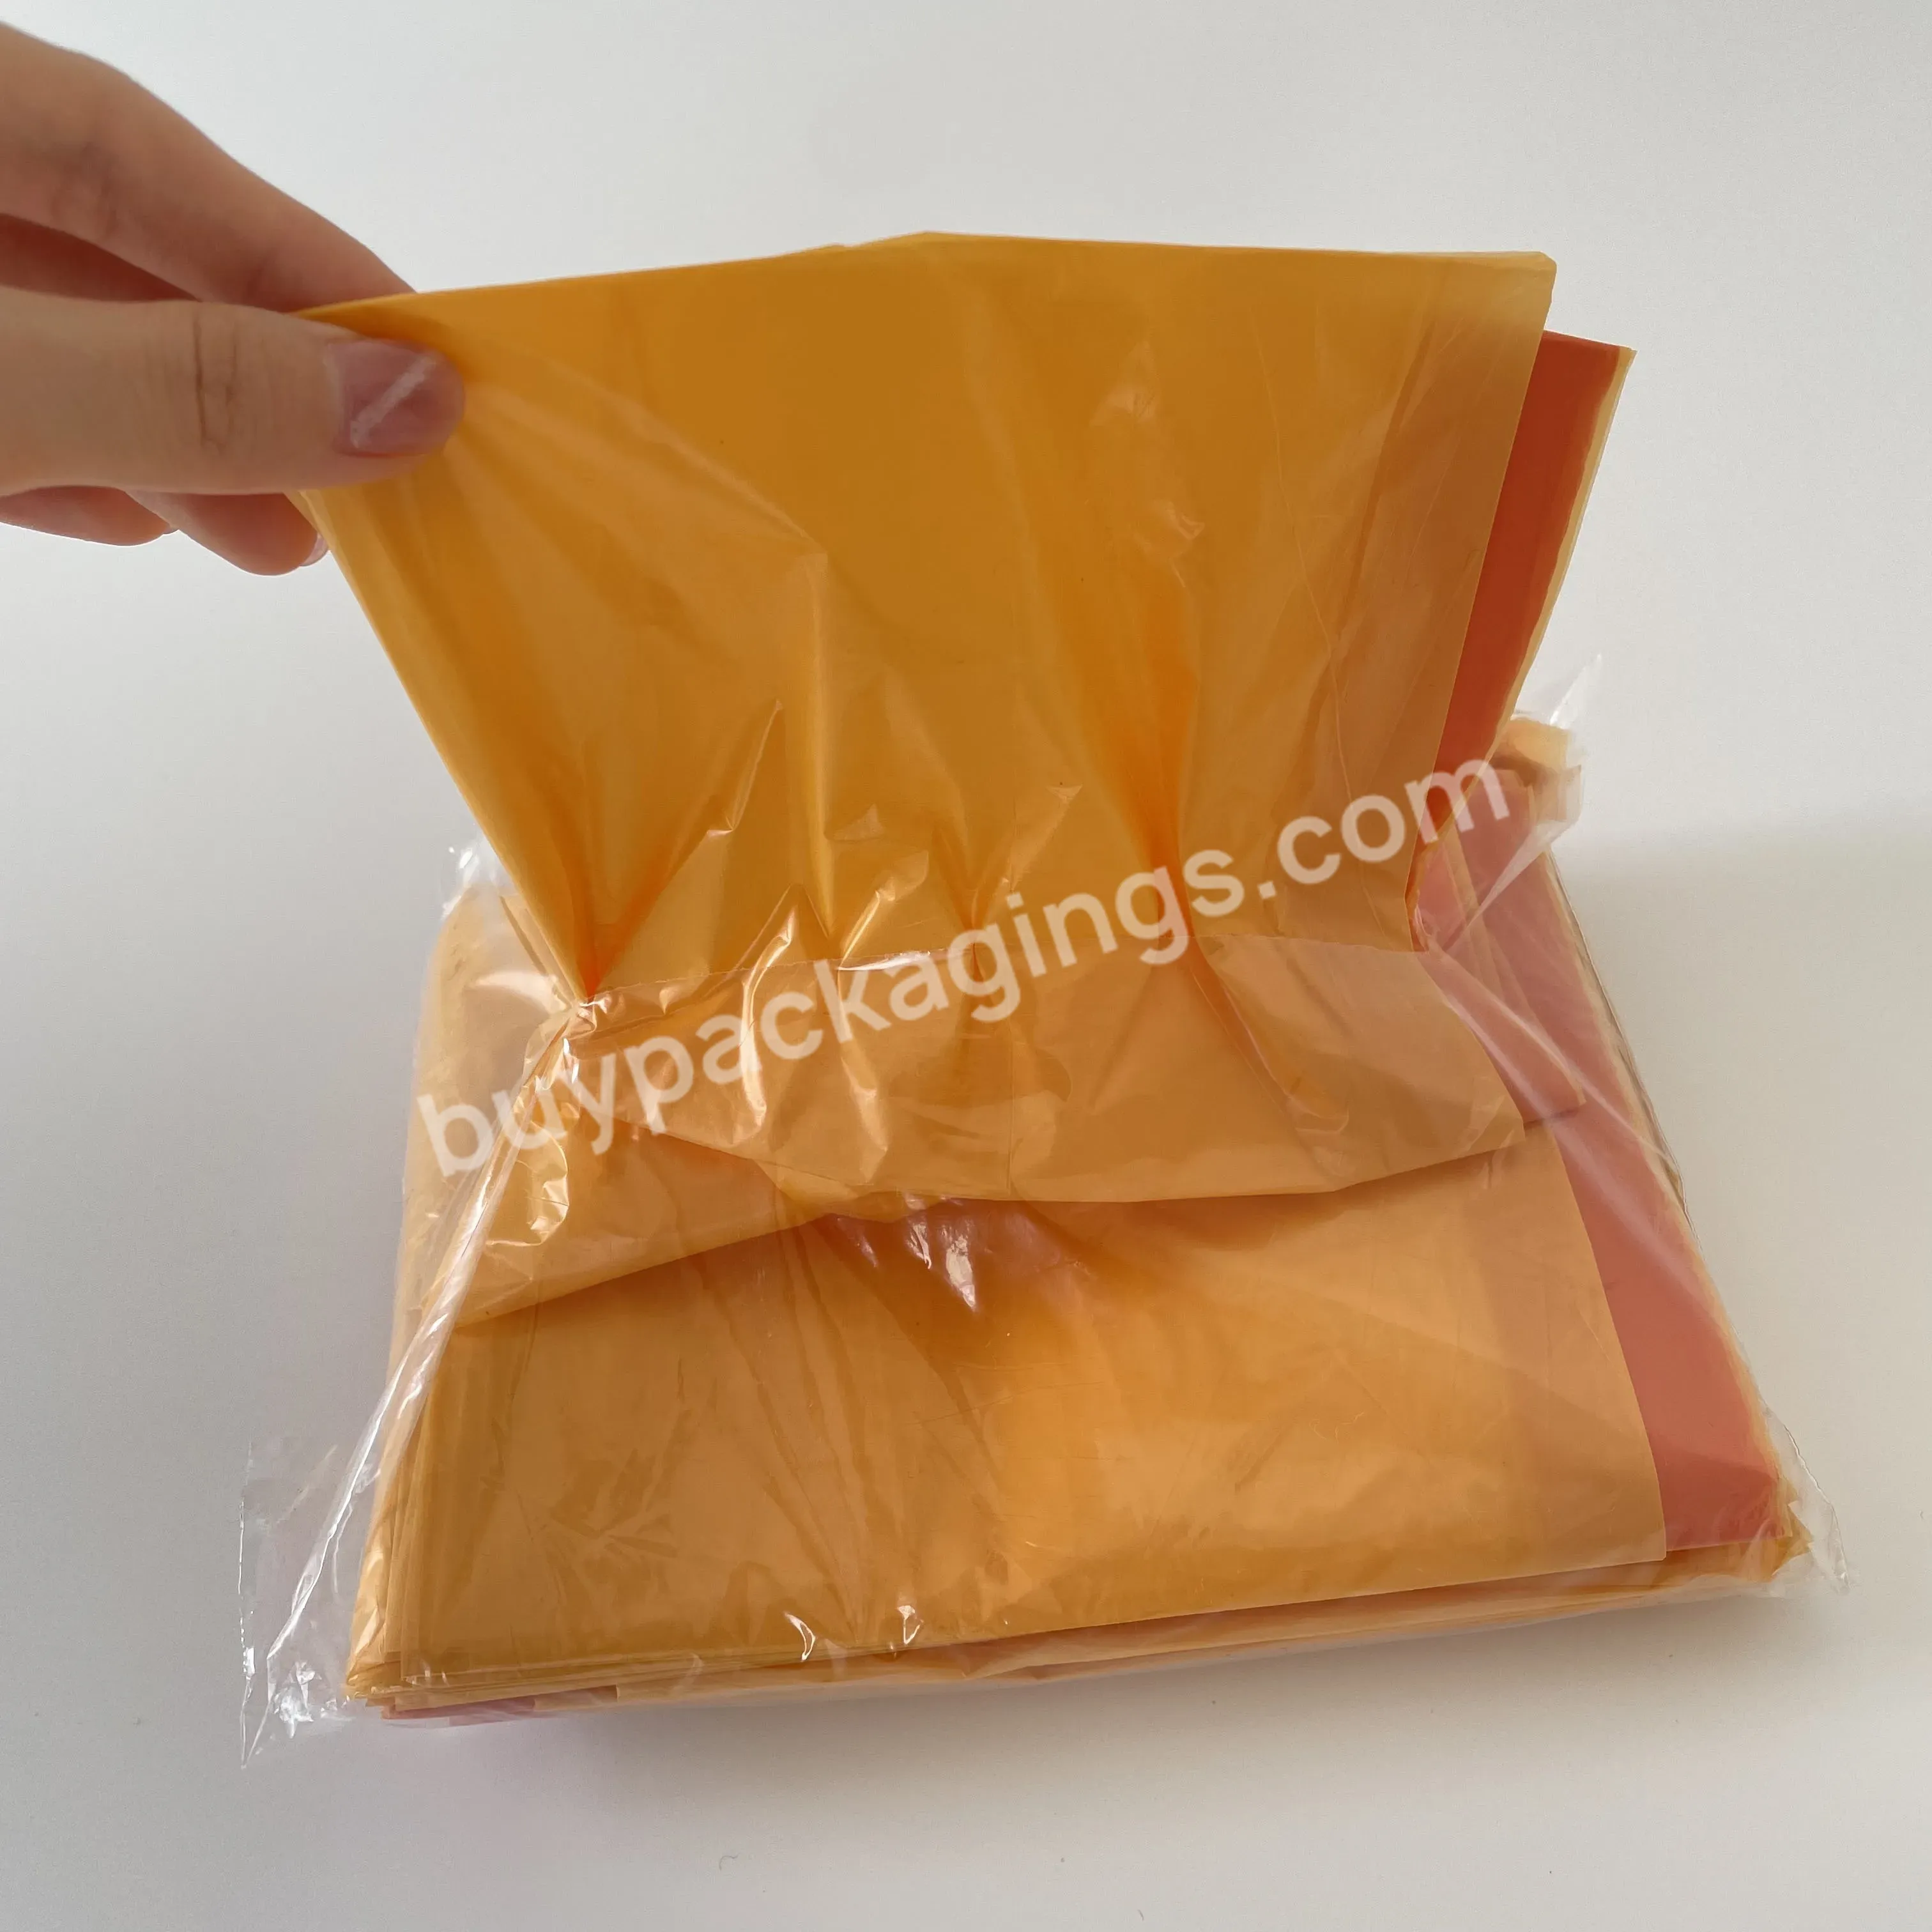 Biodegradable Garbage Bags Drawstring Trash Bag 30pcs/bag With Or Without Paper Boxes - Buy Biodegradable Bag,Drawstring Trash Bag,Garbage Bags.